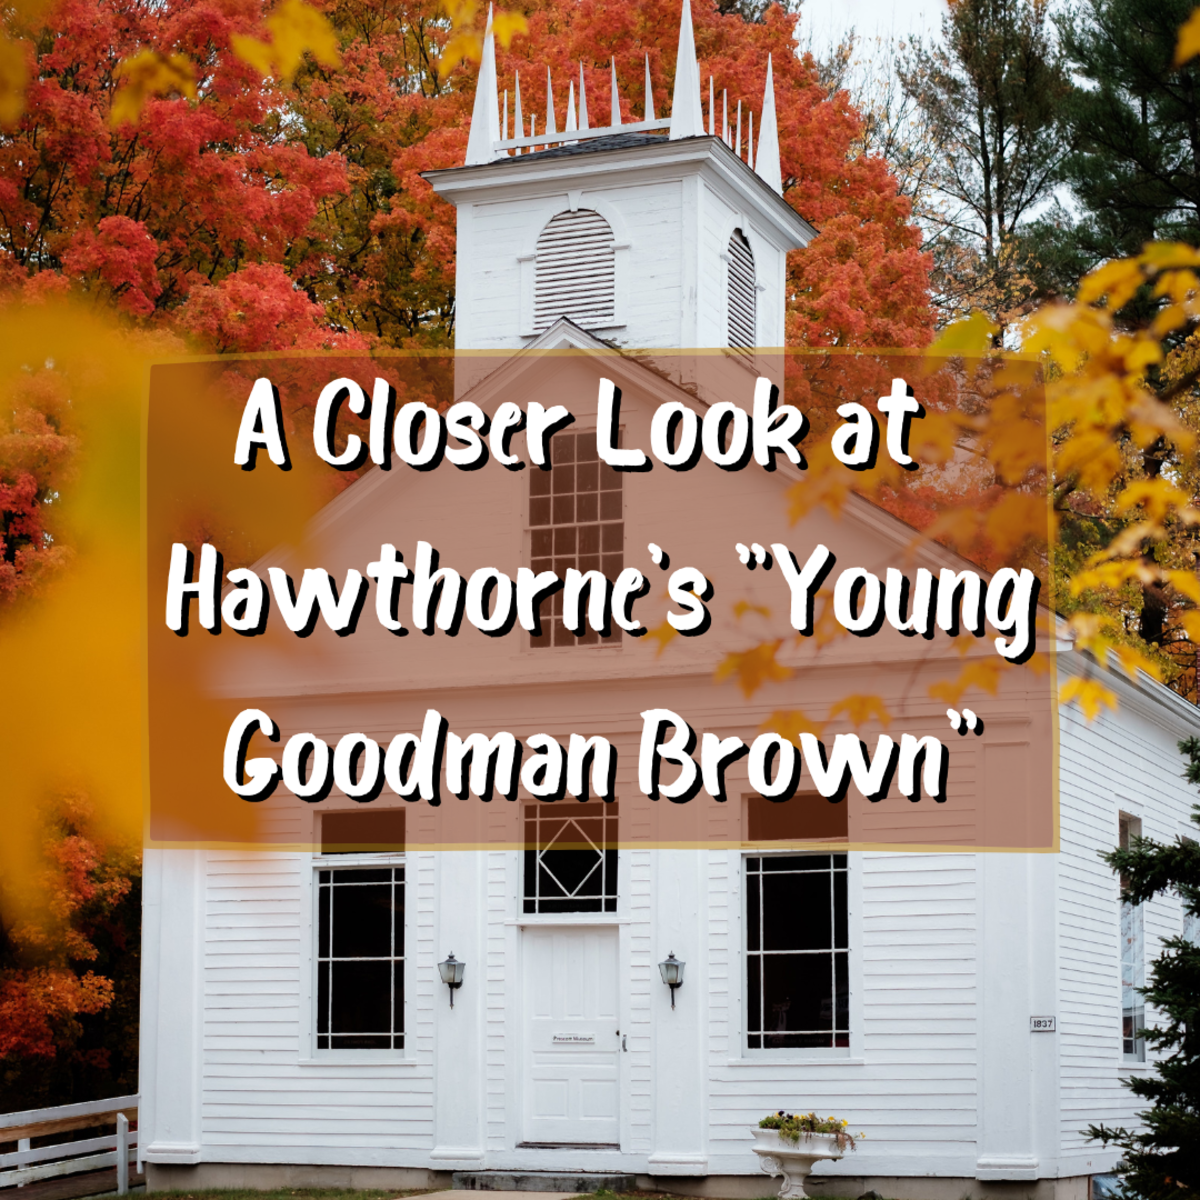 Read on to learn all about Nathaniel Hawthorne's story "Young Goodman Brown."